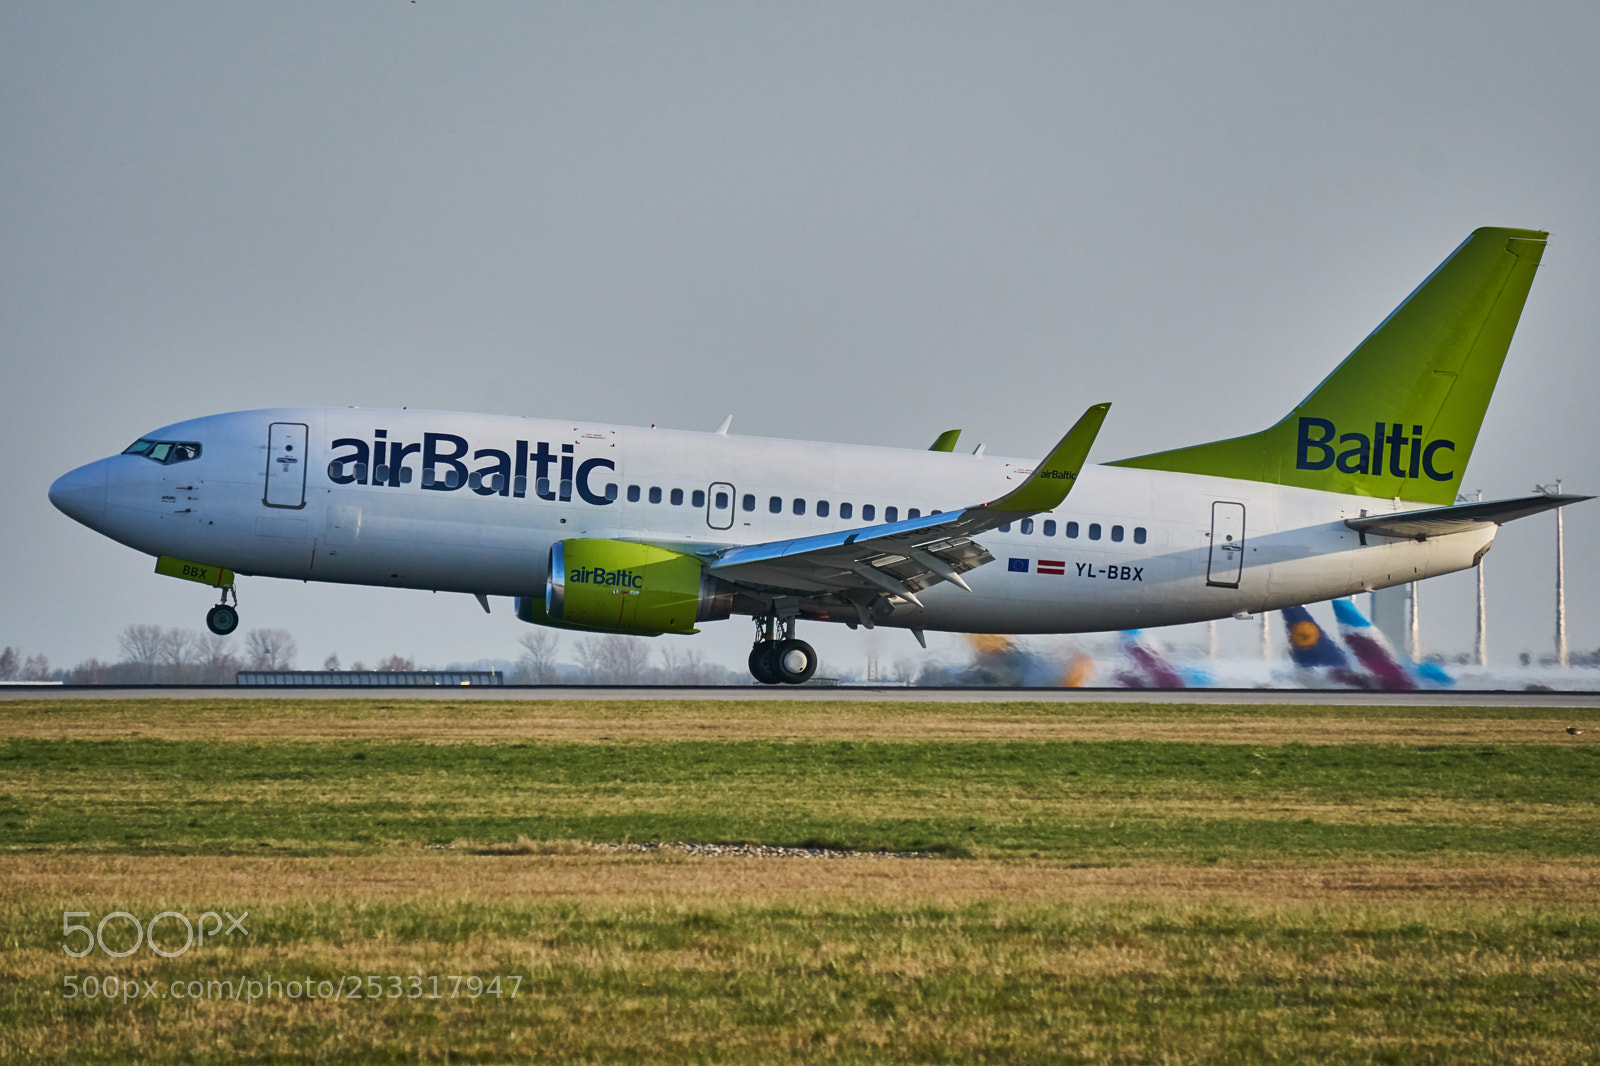 Sony a6300 sample photo. Airbaltic photography